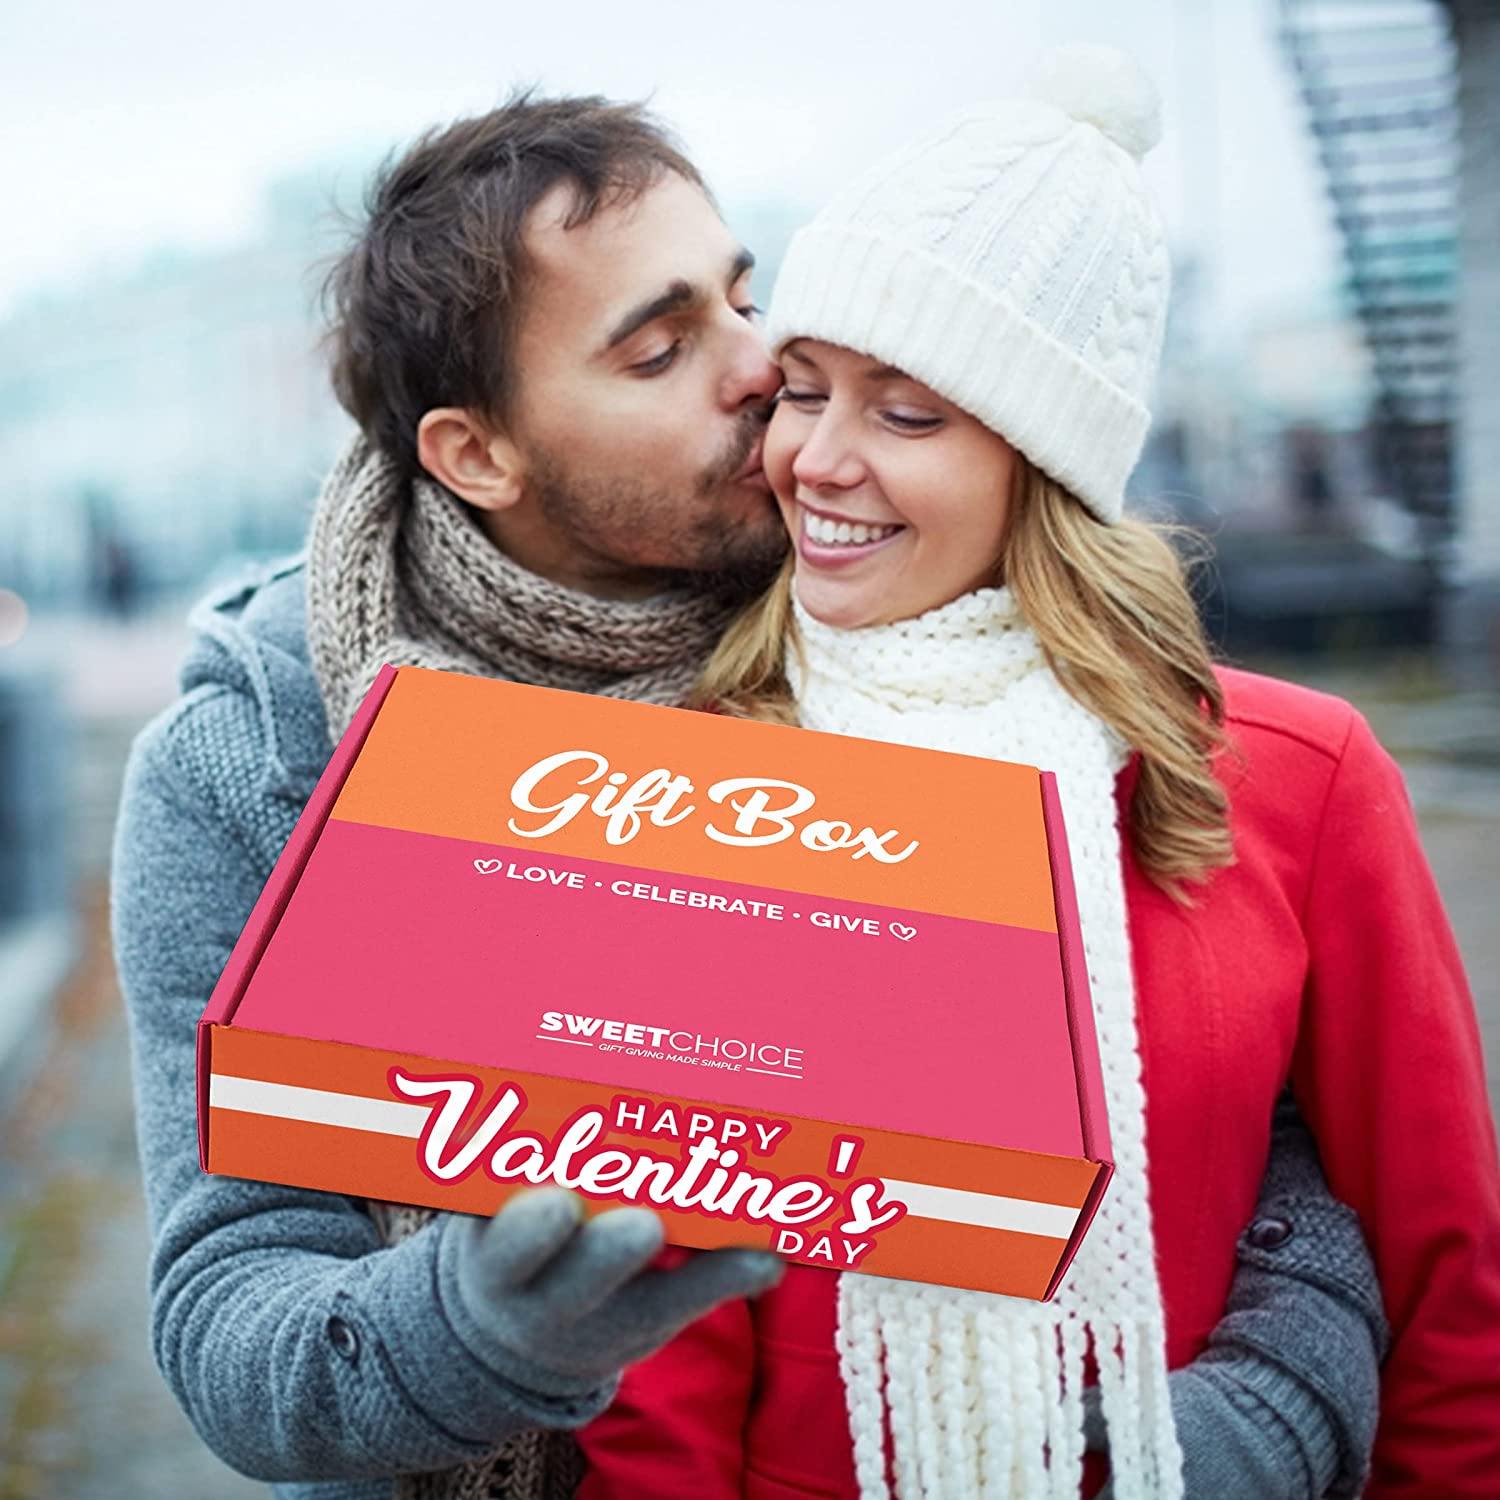 Valentine's Day Gift Care Package (50ct) Snacks Chocolates Candy Gift Box  Assortment Variety Bundle Crate Present for Boy Girl Friend Student College